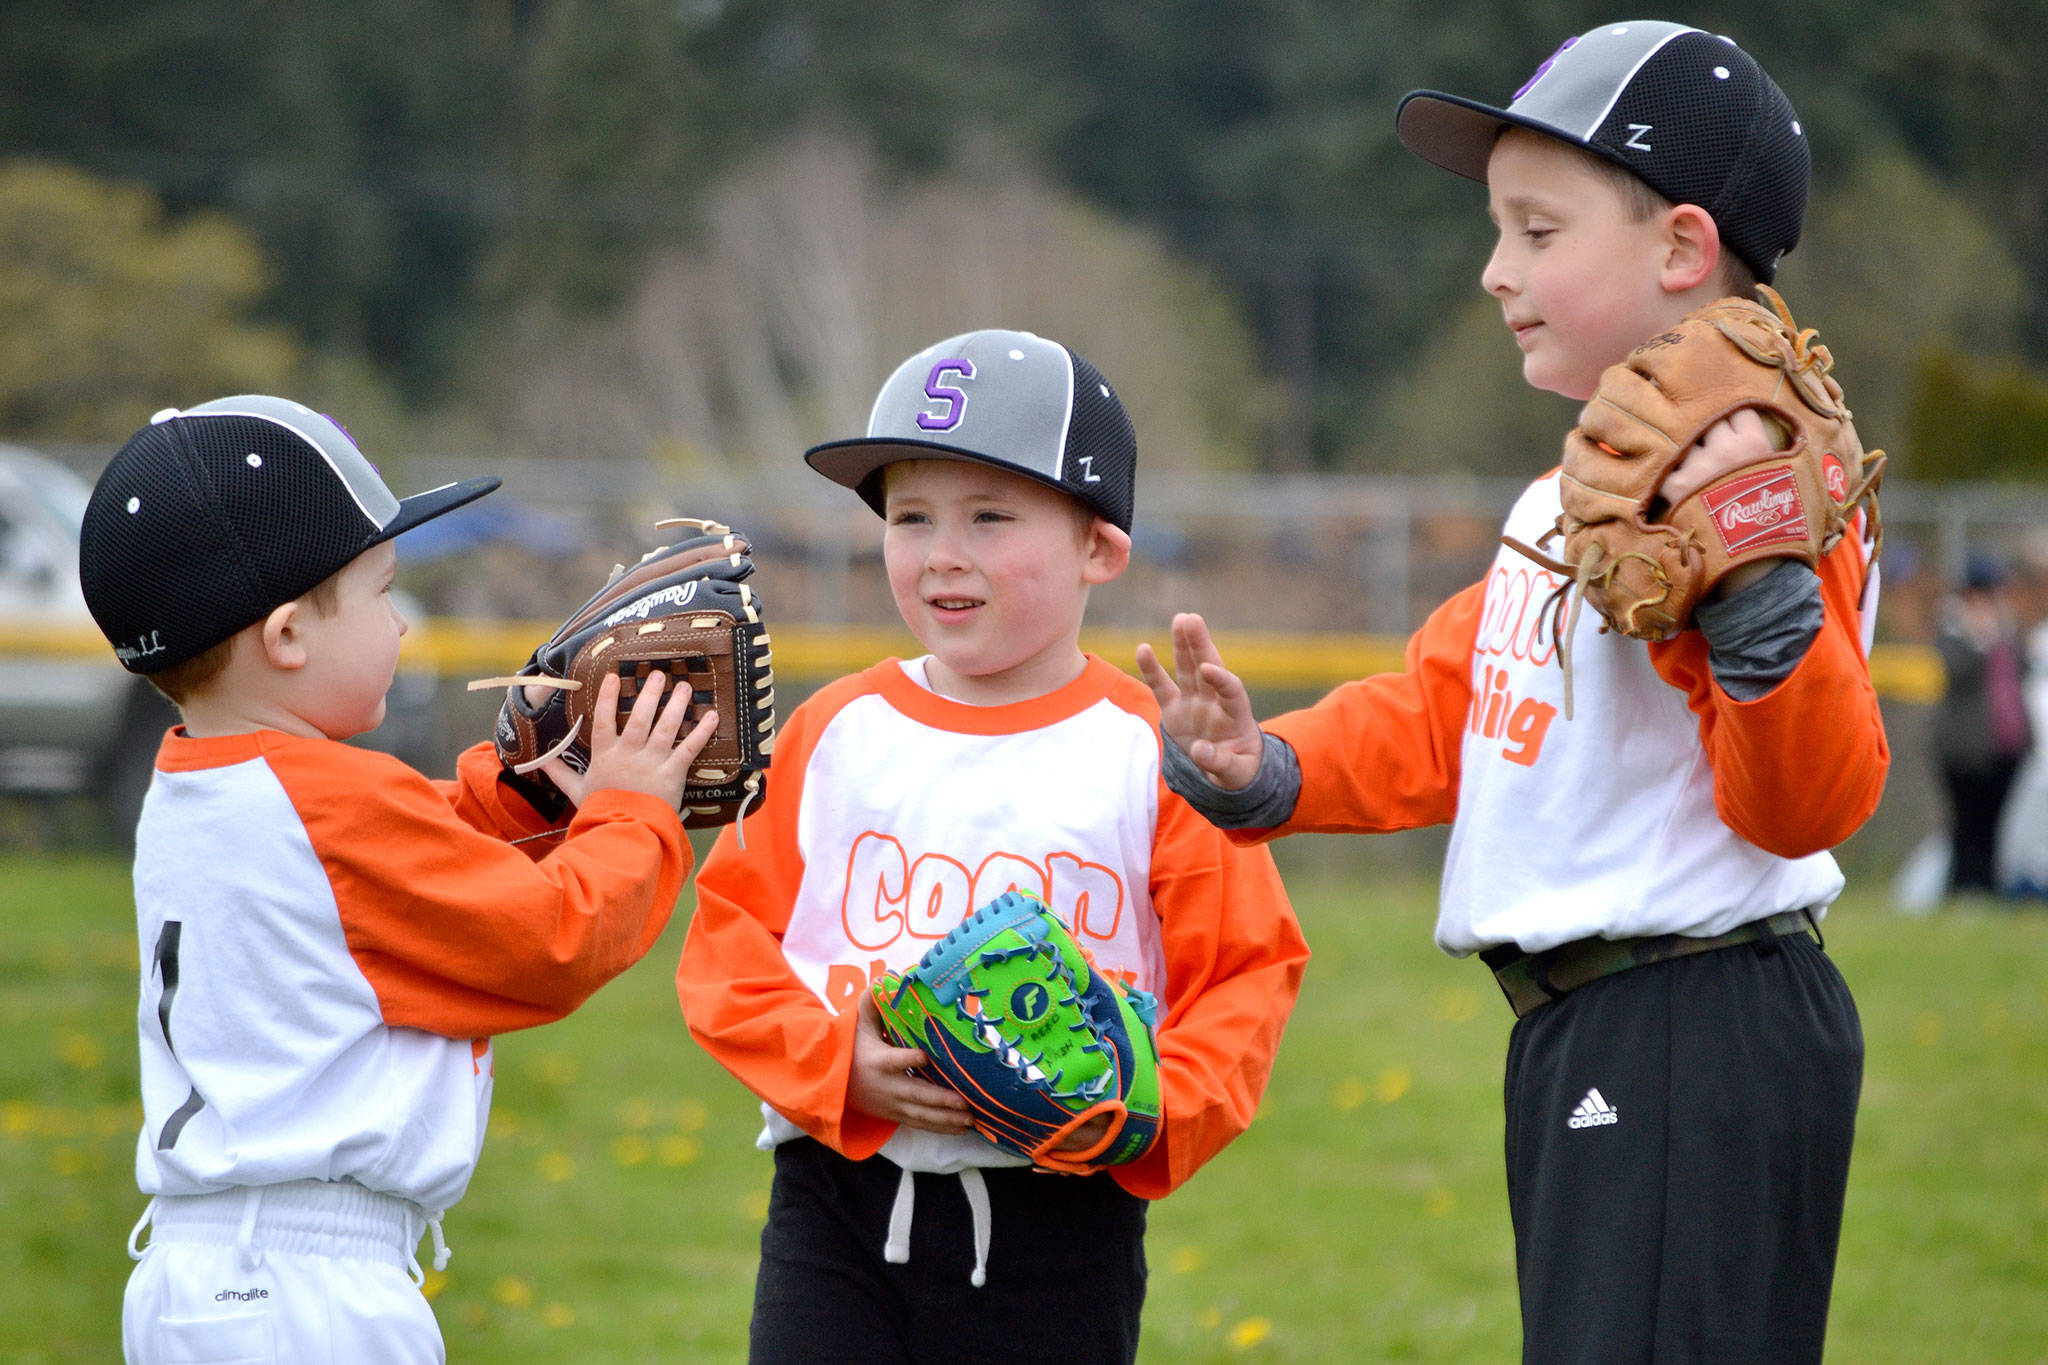 T-ball teammates for Coon Plumbing, from left, Parker Horst, Reed Nash and Cash Coon confer before a game about best strategies for catching a ball. Sequim Gazette photo by Matthew Nash